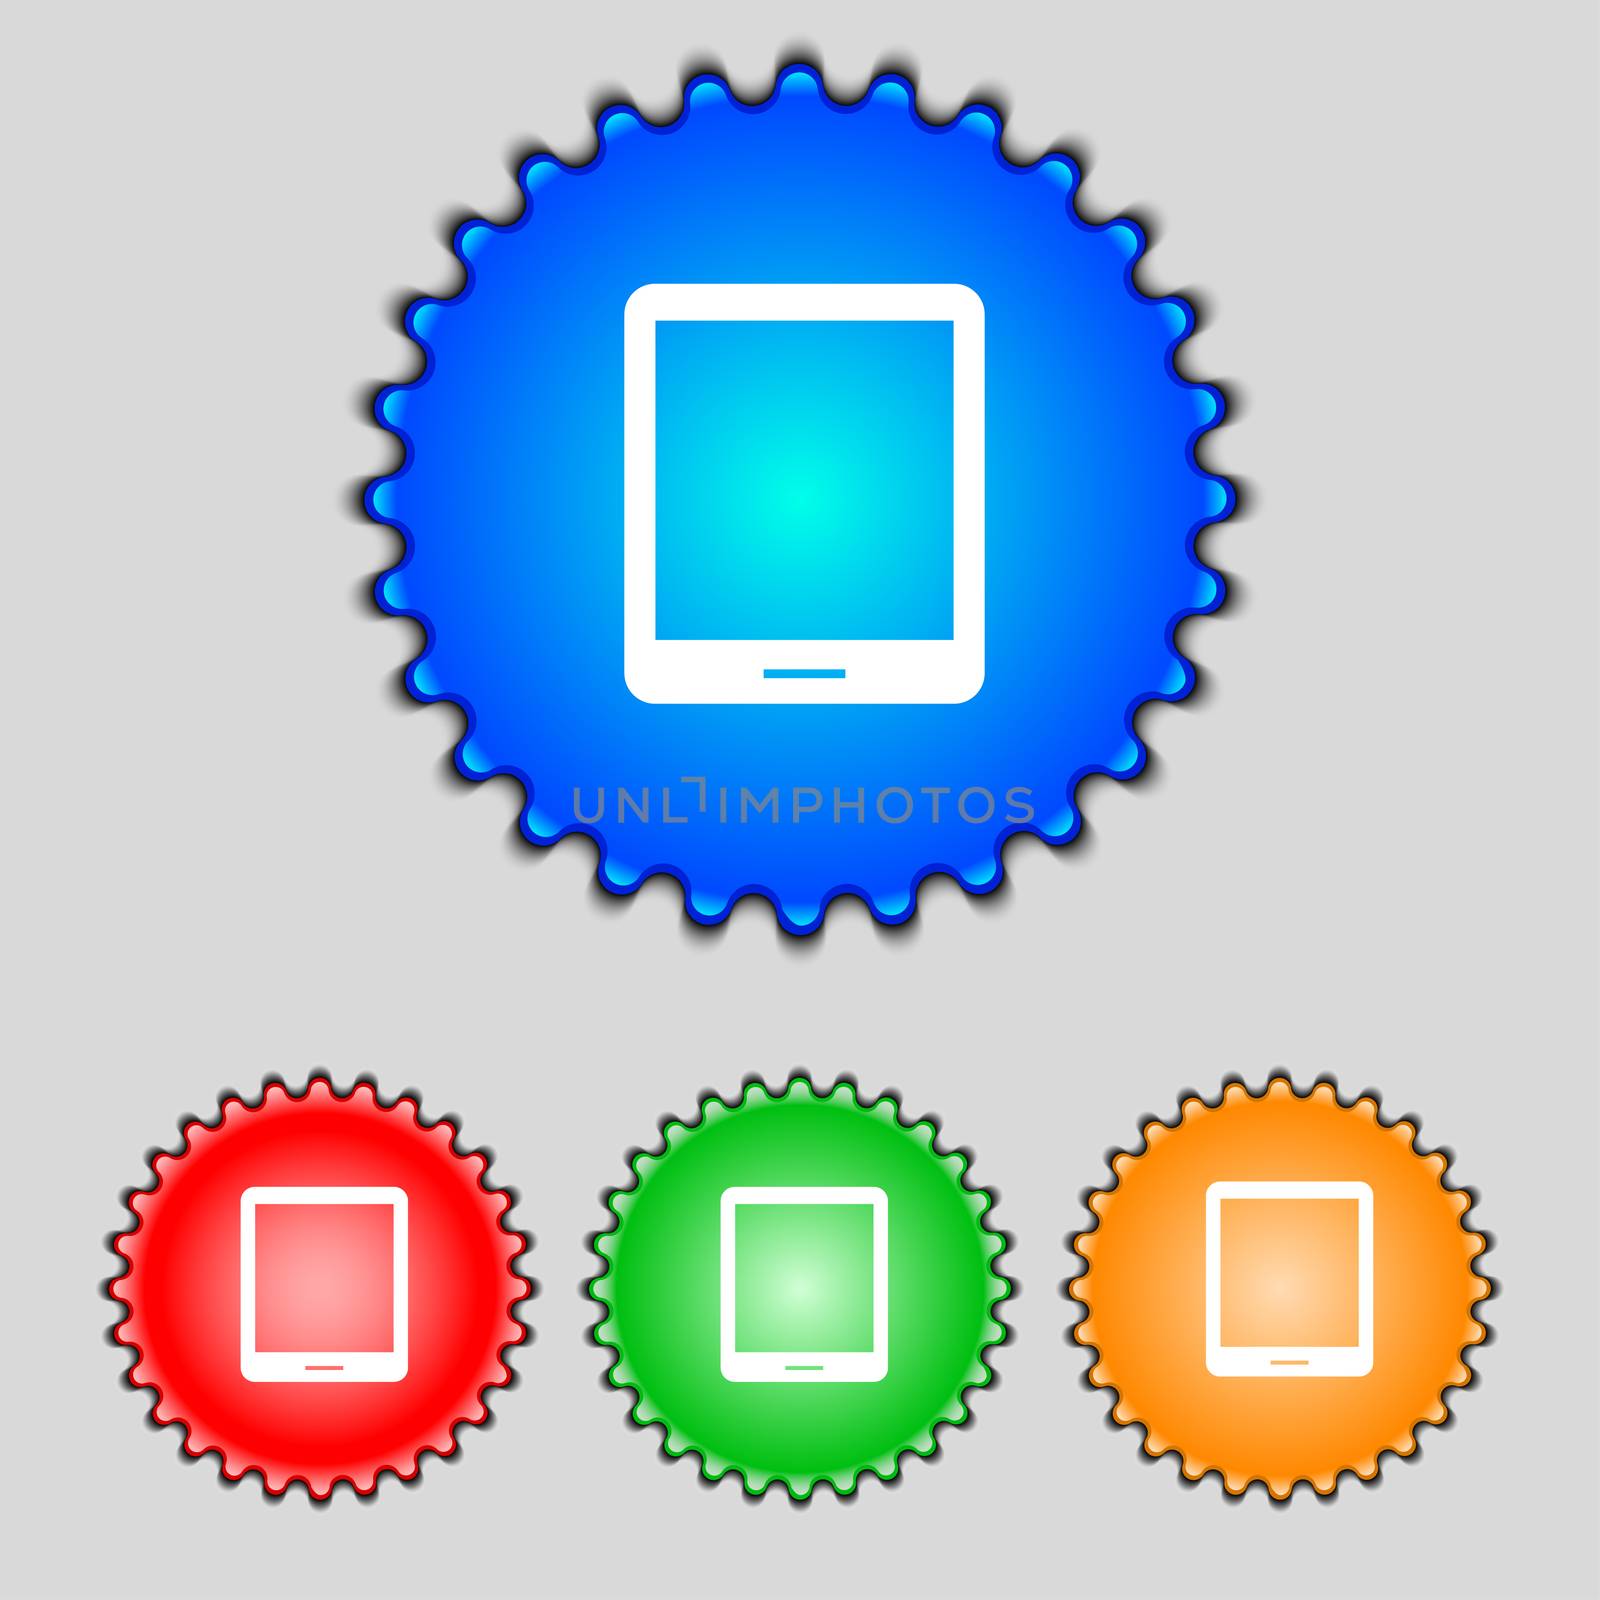 Tablet sign icon. smartphone button. Set colur buttons. illustration